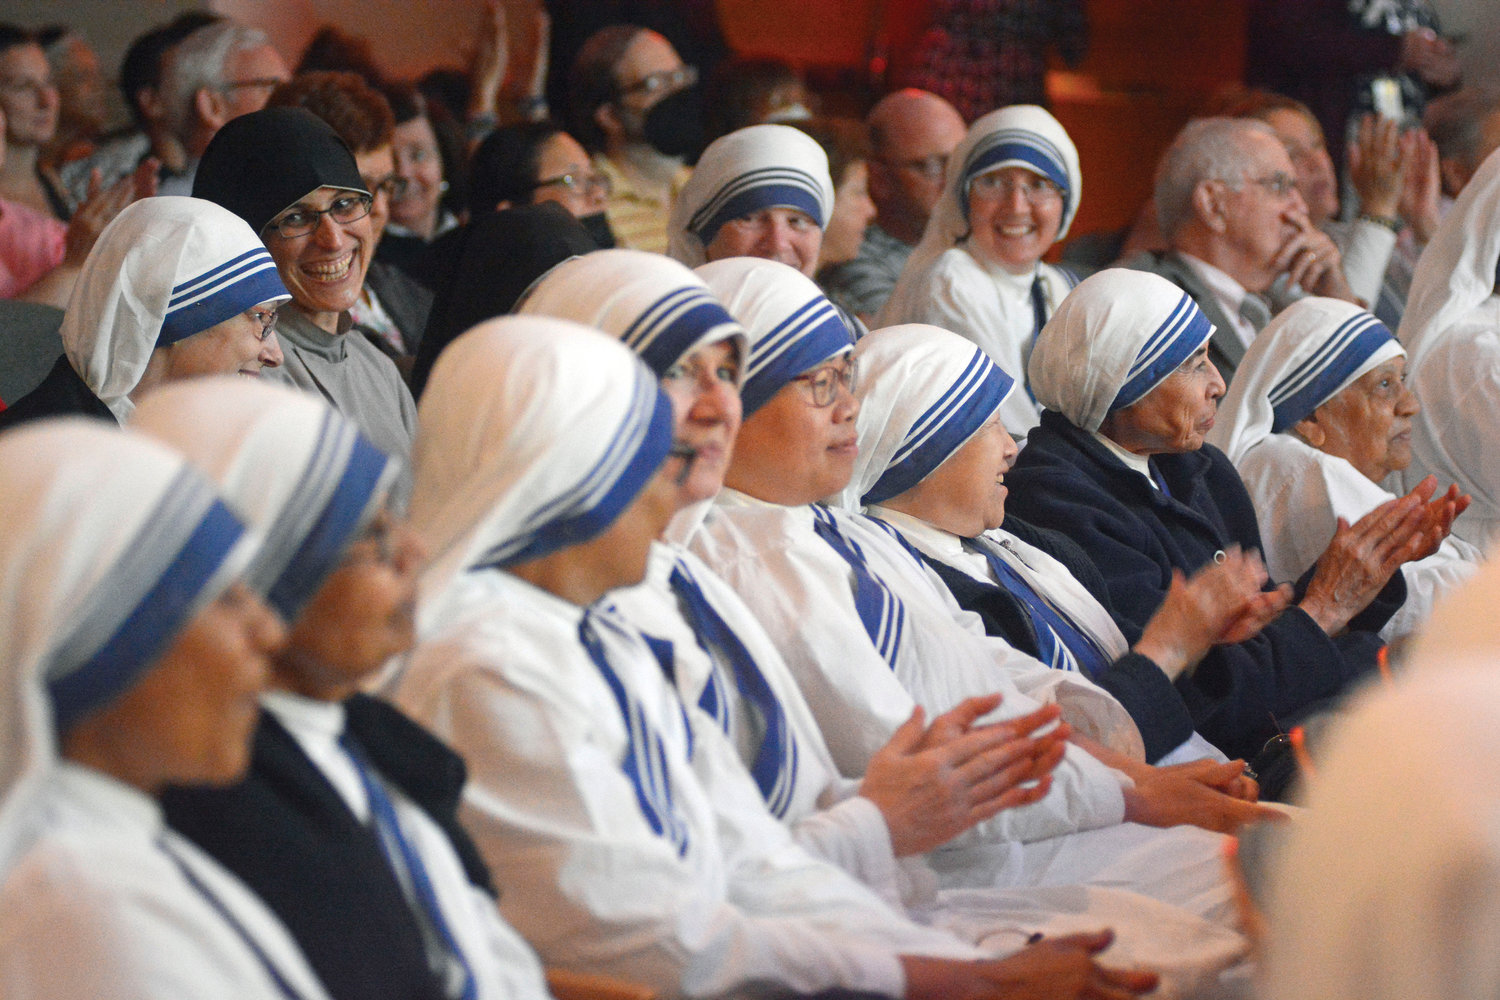 Many Missionaries of Charity, the order founded by St. Teresa of Calcutta, attend a screening of the documentary “Mother Teresa: No Greater Love” Sept. 15 at the Sheen Center for Thought & Culture in lower Manhattan.